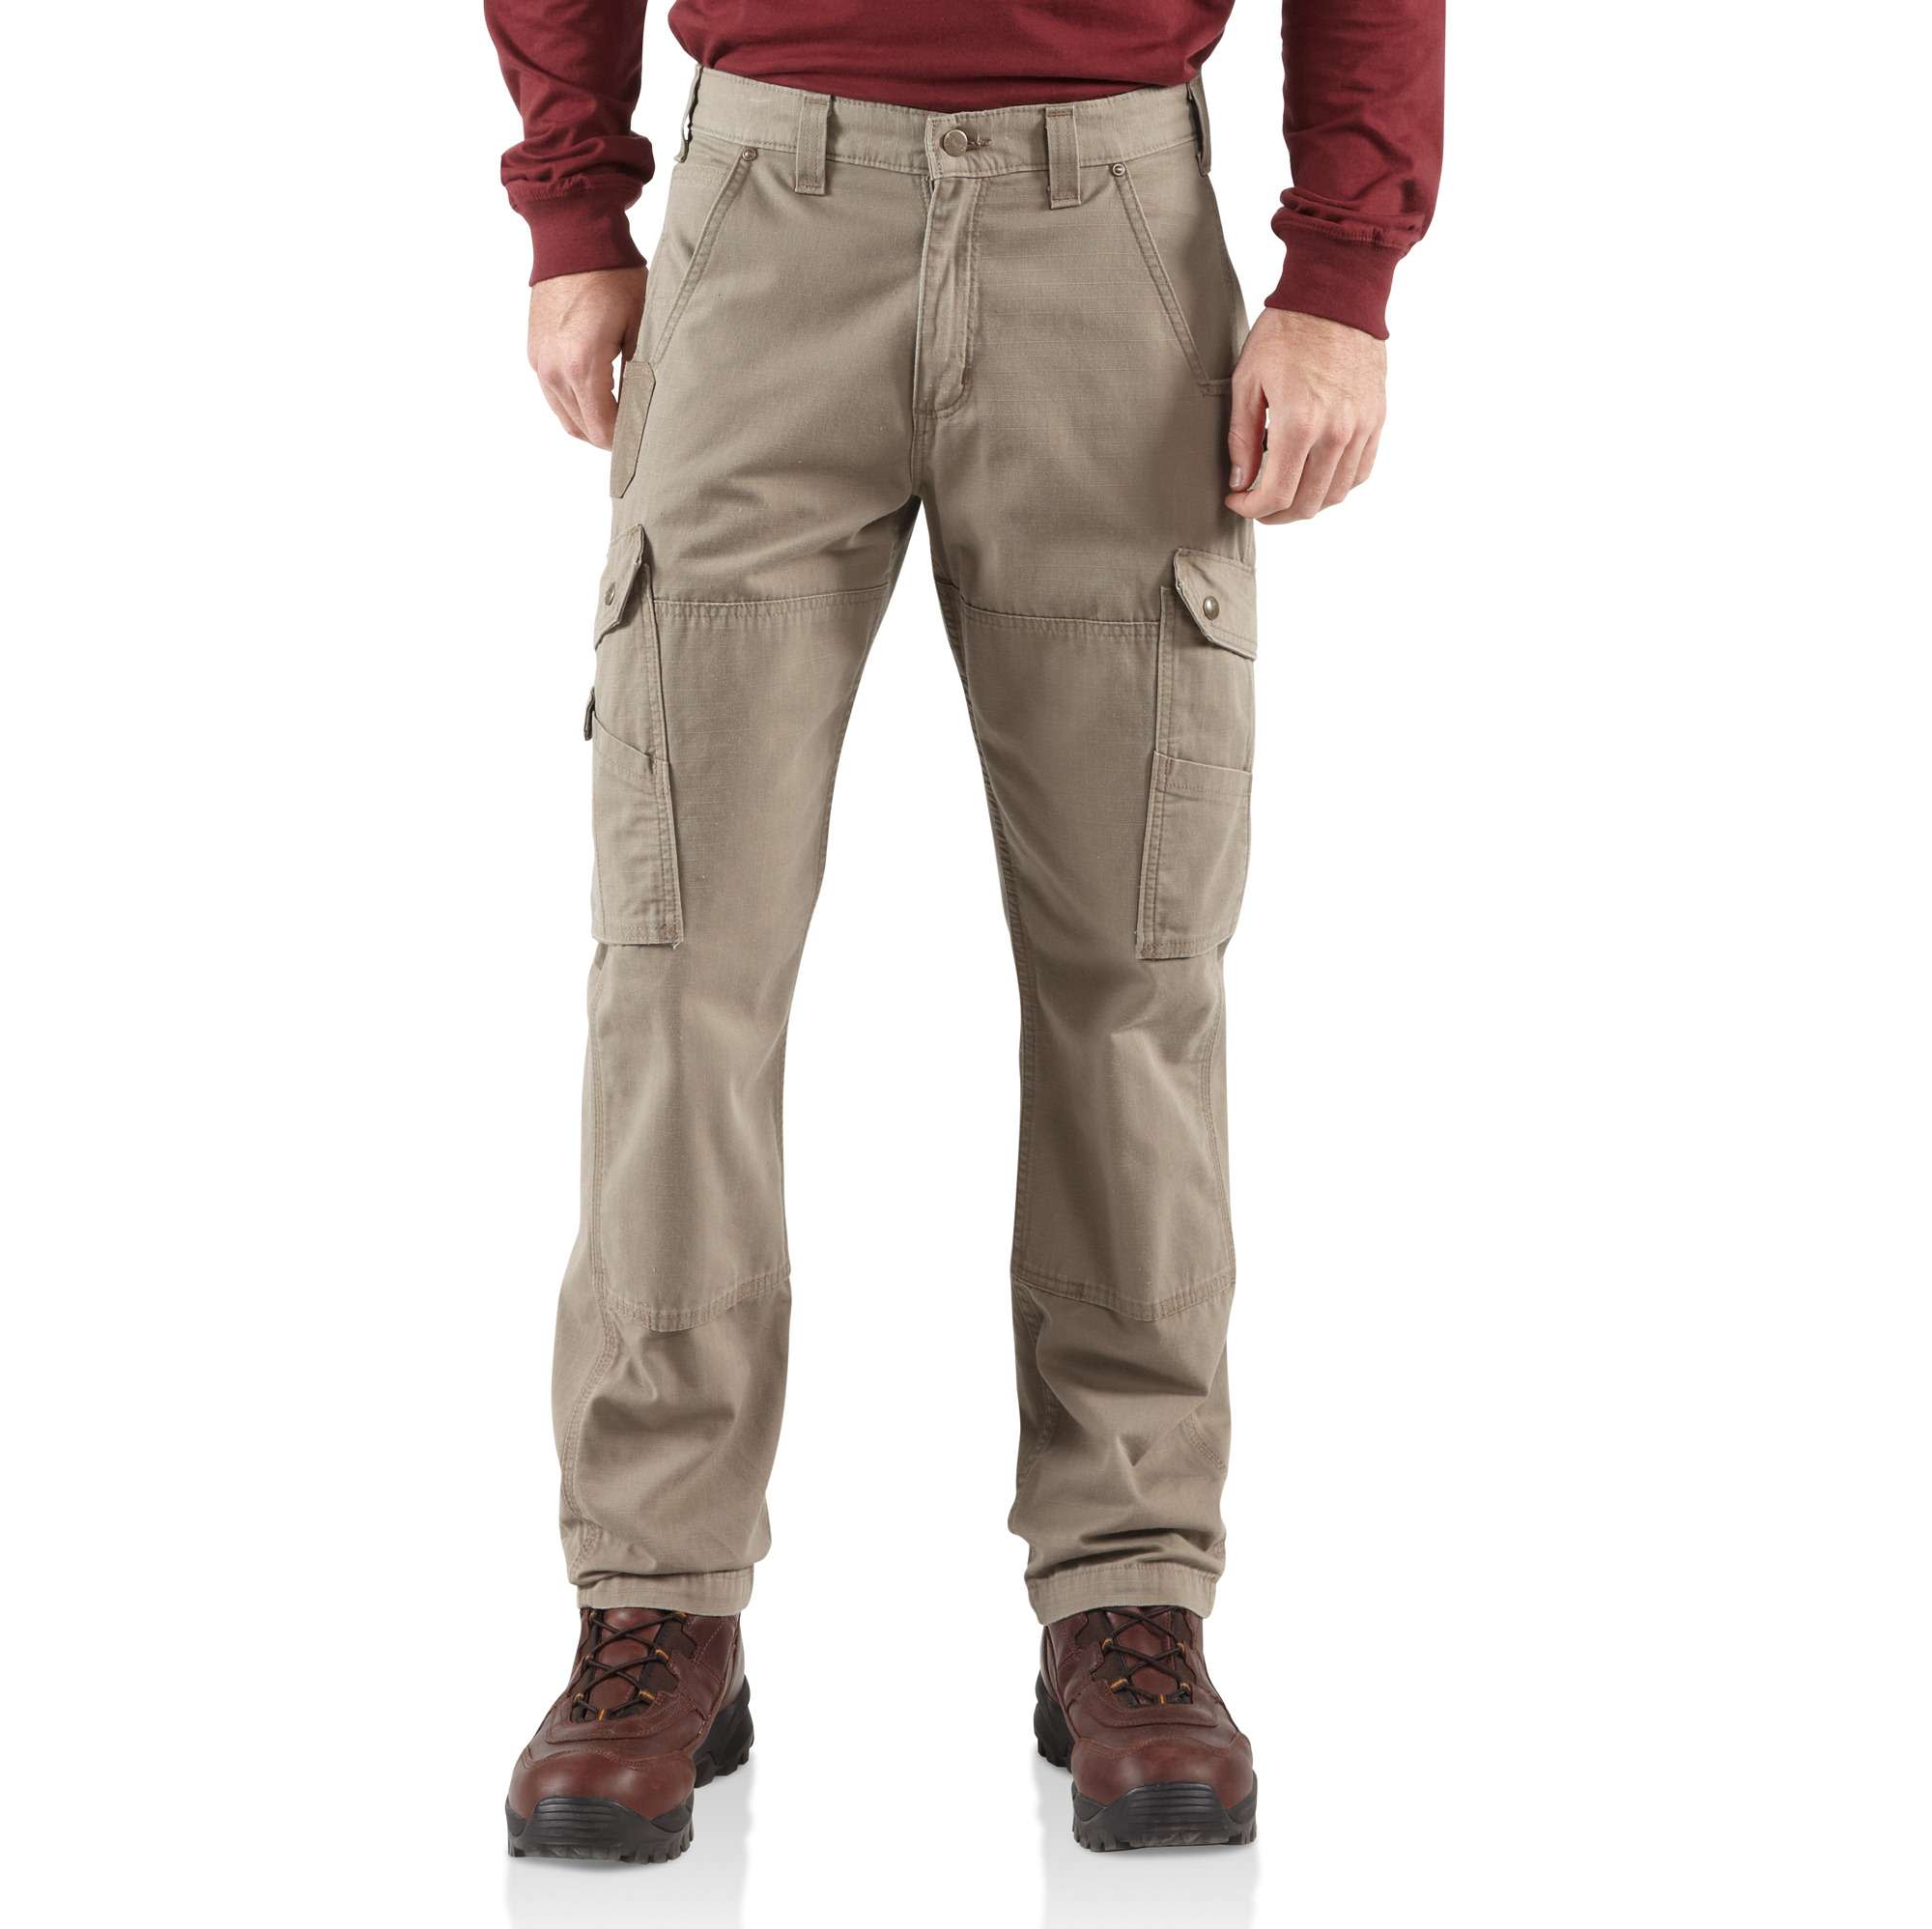 Shop Carhartt Tapered Pants Street Style Cotton Oversized Cargo